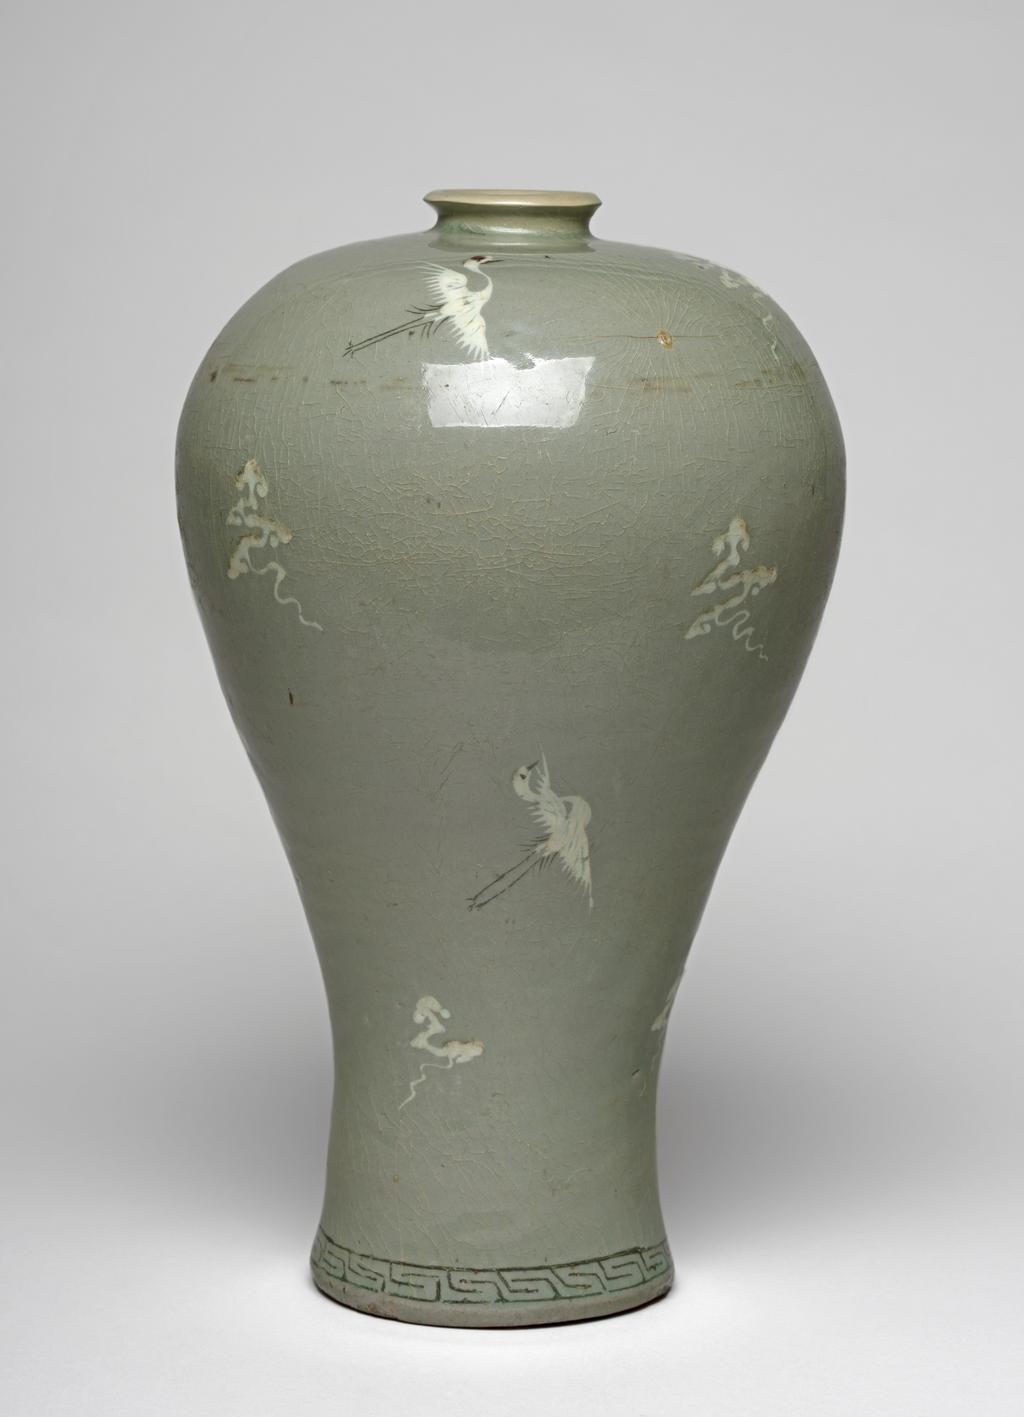 An image of Maebyong. Vase with cranes and clouds. Unknown pottery, Korea, North Cholla province. Yuch'on-ri, Puan. This maebyong-shaped vase has a wide almost flat shoulder and a full body that gradually tapers towards the spreading foot. The foot-rim is broad and shallow. The everted mouth is restored and does not correspond to the original form, which would have been of angled cup shape. A band of key-fret is inlaid in black slip around the base. Cranes and cloud motifs are sparsely arranged over the whole vessel with a lot of breathing space between; they are inlaid in black and white slip and emphasised with touches of underglaze copper-red, adding accents of brighter colour. The glaze is thinly but unevenly applied; it is glossy and has a pale blue-green tone. The whole surface is covered with a fine crackle. The foot shows traces of fire-clay spurs. Stoneware, thrown, inlaid in black and white slip, with details painted in copper-red, and celadon-glazed. Height, whole, 30.6 cm, diameter, rim, 4.8 cm, diameter, foot, 10.0 cm, circa 1150-1200. Koryo Dynasty. Notes: Vessels such as this one were used for wine.